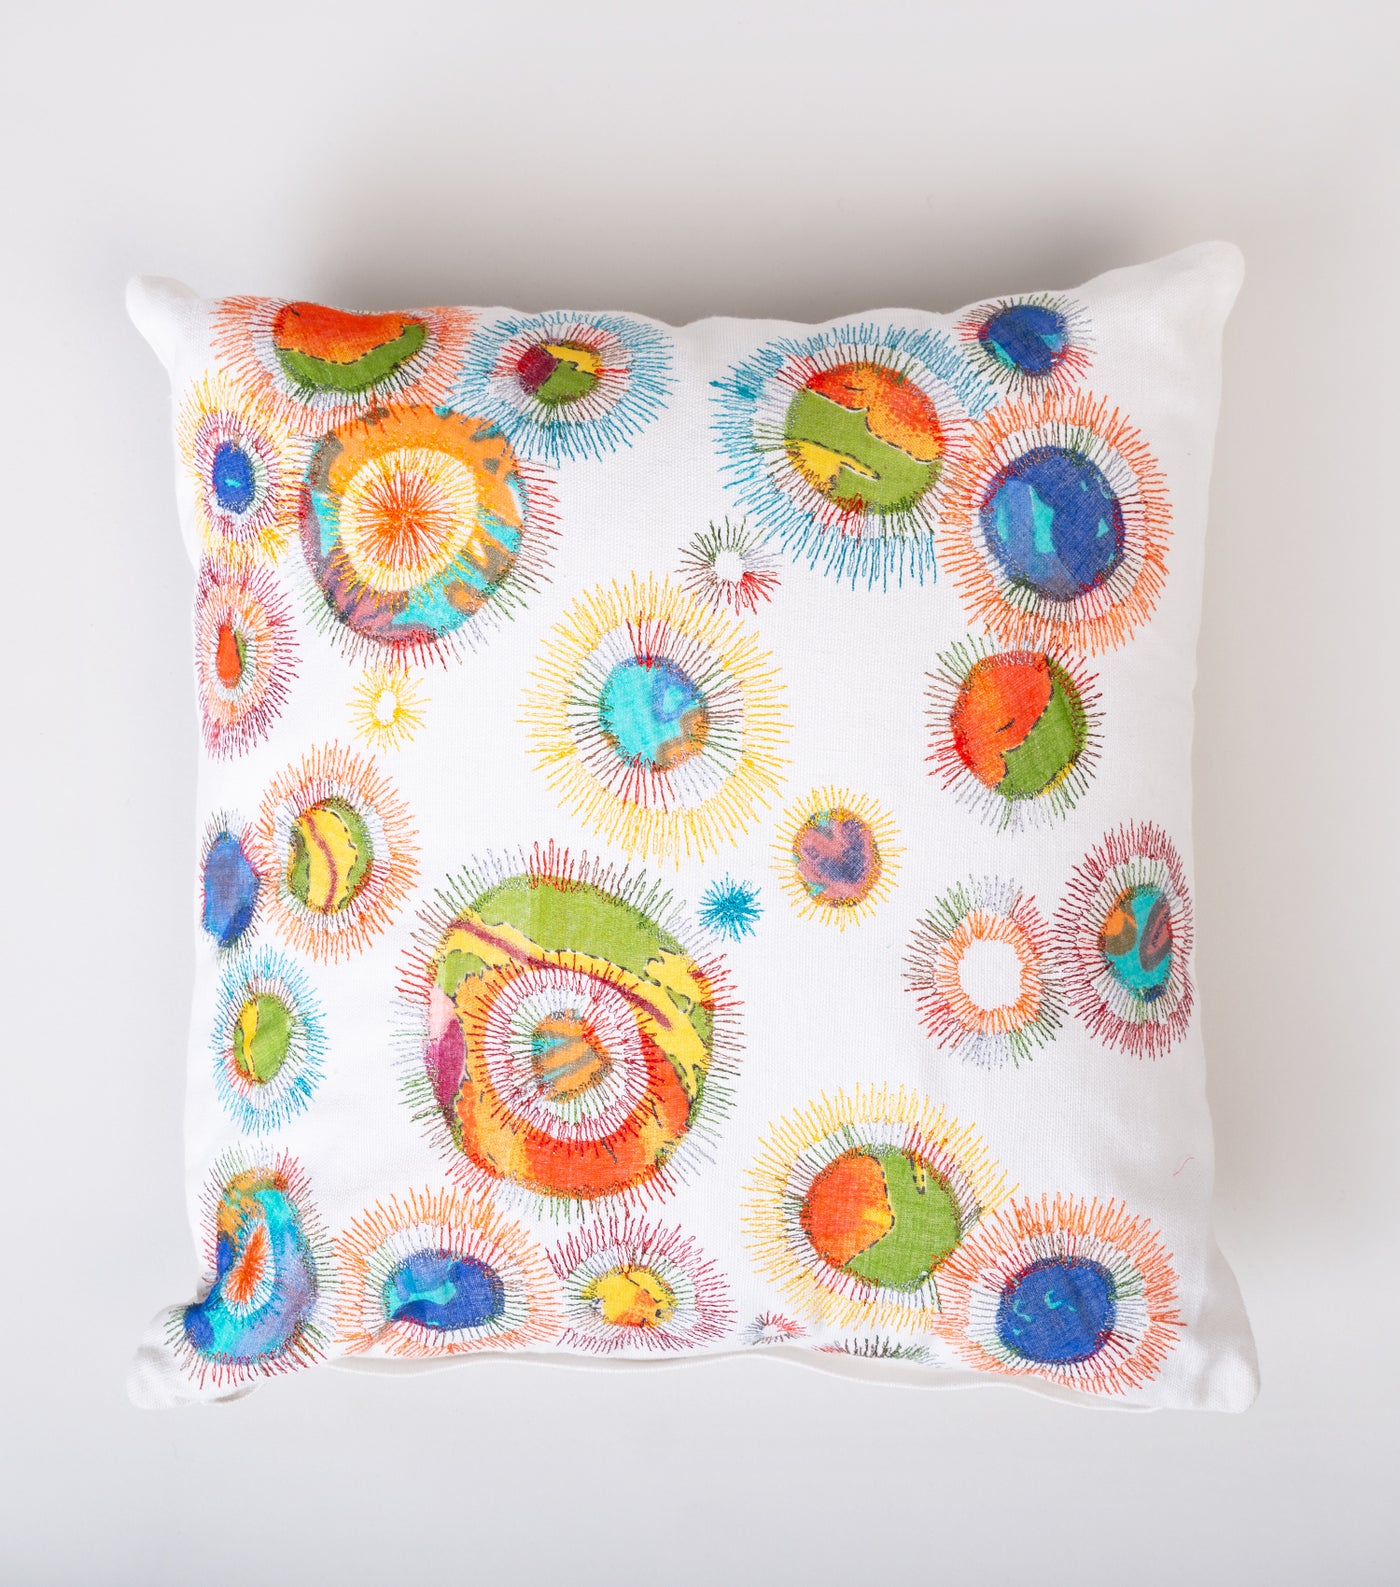 White Patch Work Embroidered Cotton Cushion Cover